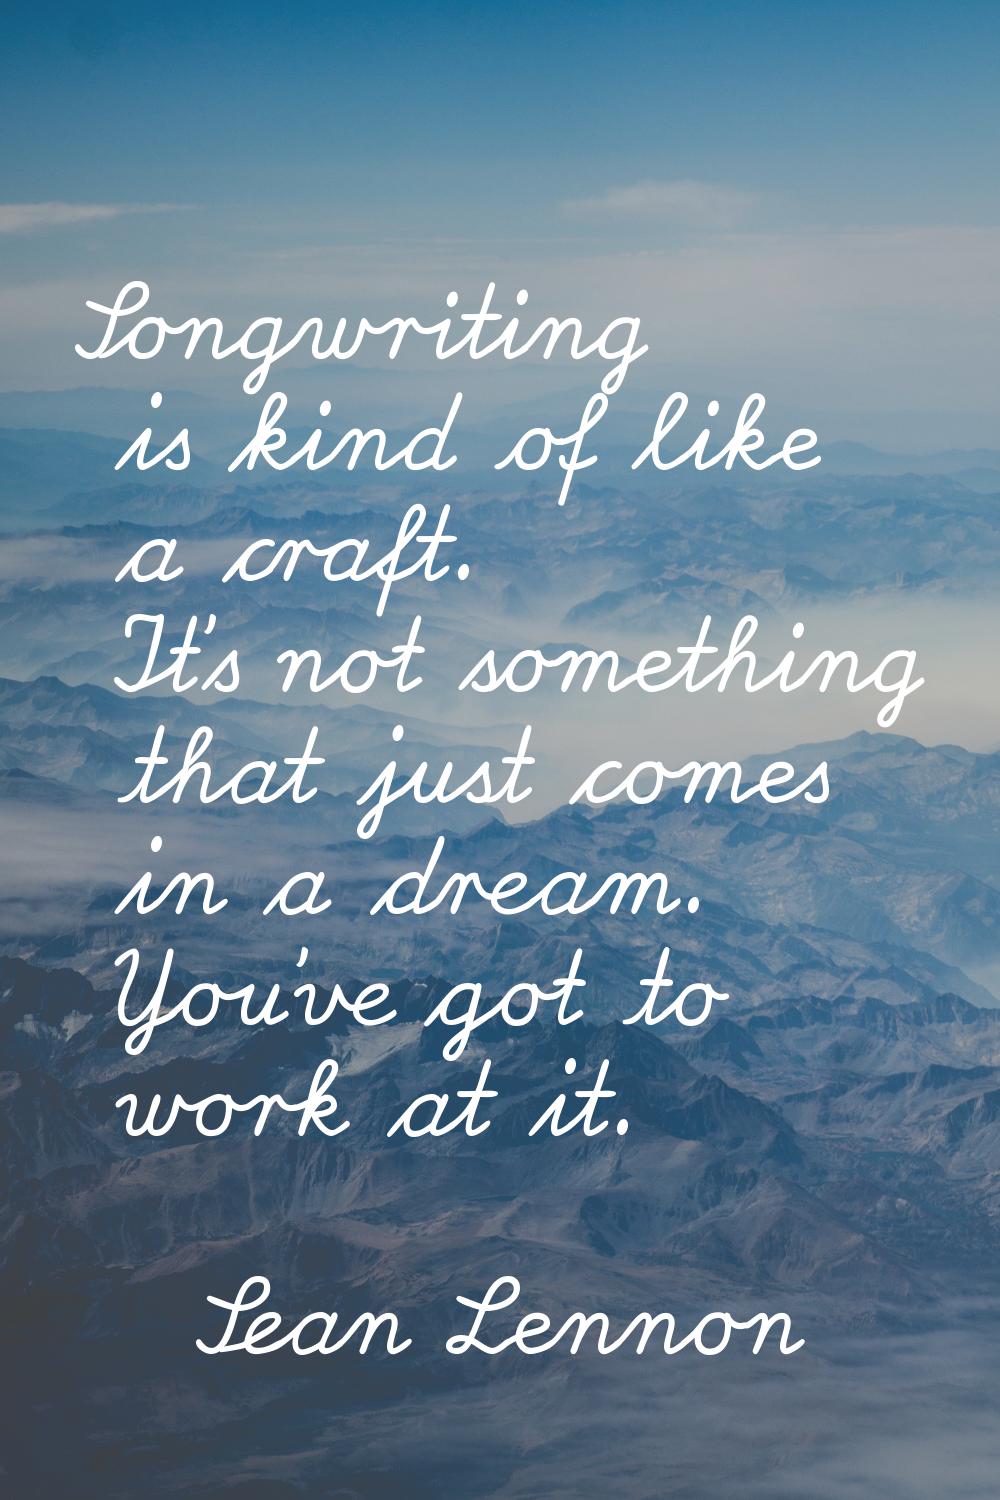 Songwriting is kind of like a craft. It's not something that just comes in a dream. You've got to w